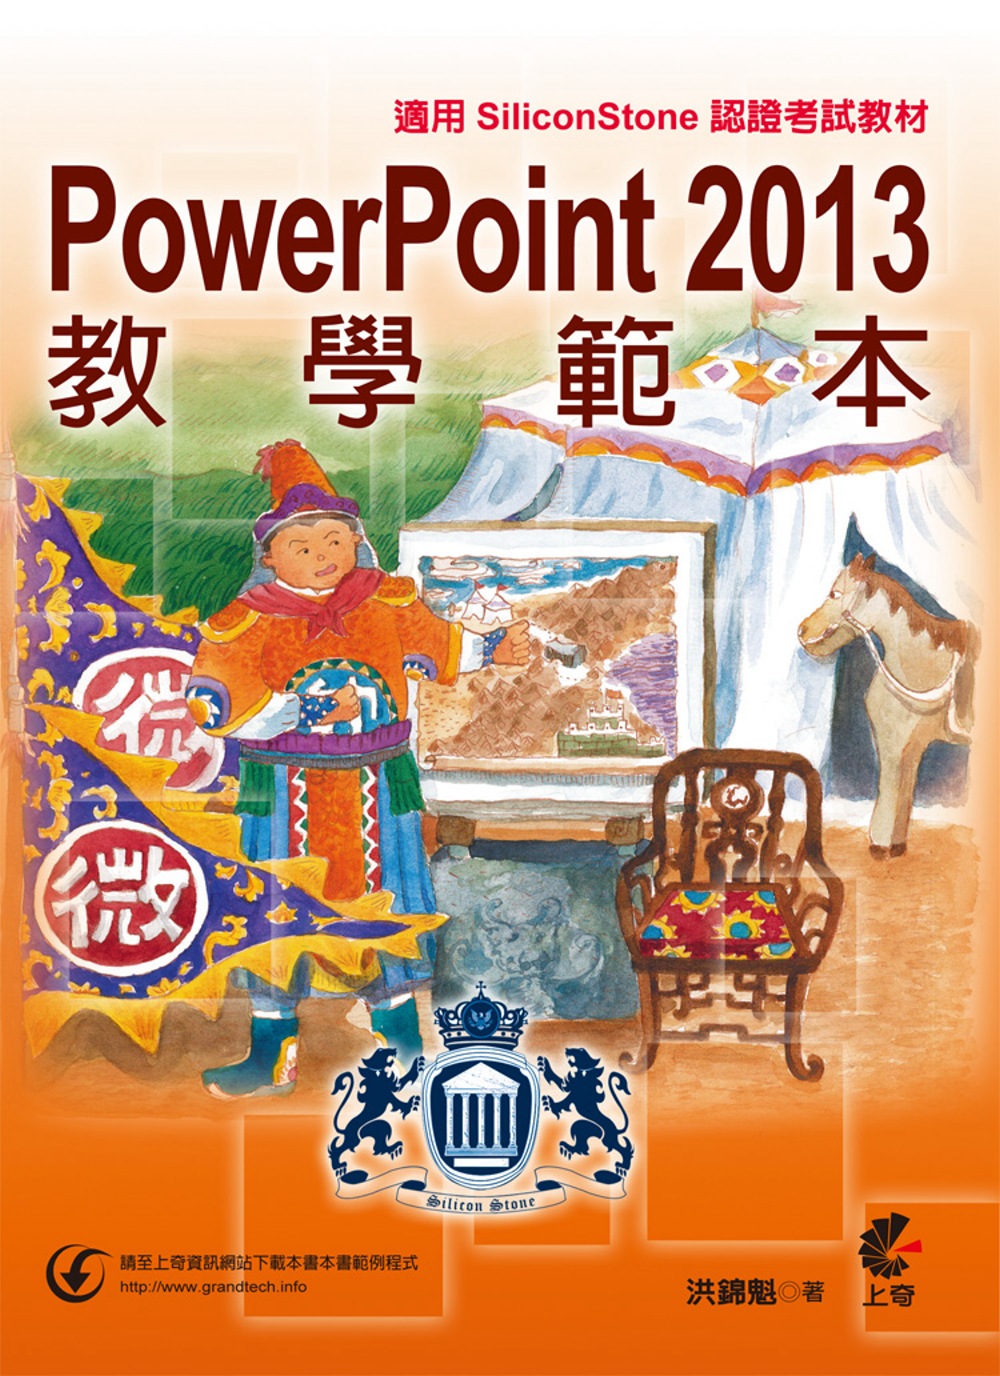 PowerPoint 2013 教學範本（適用Silicon...